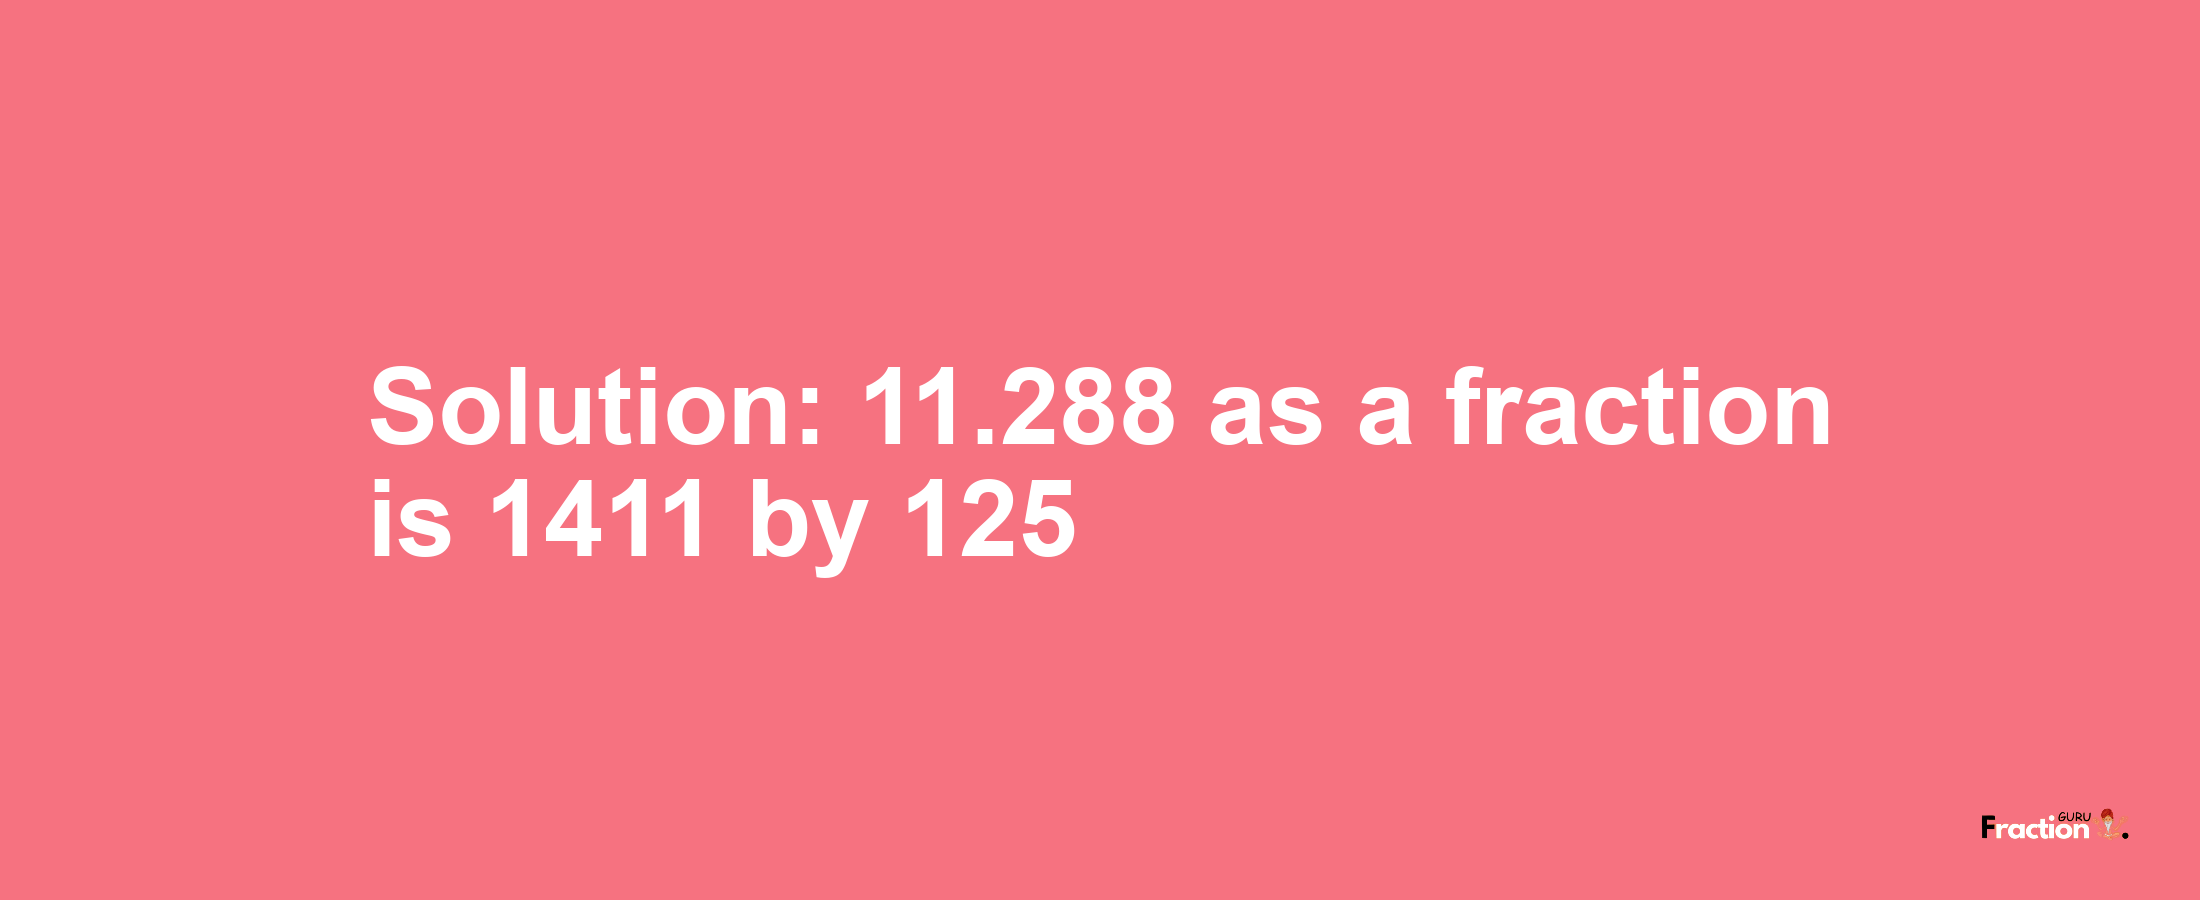 Solution:11.288 as a fraction is 1411/125